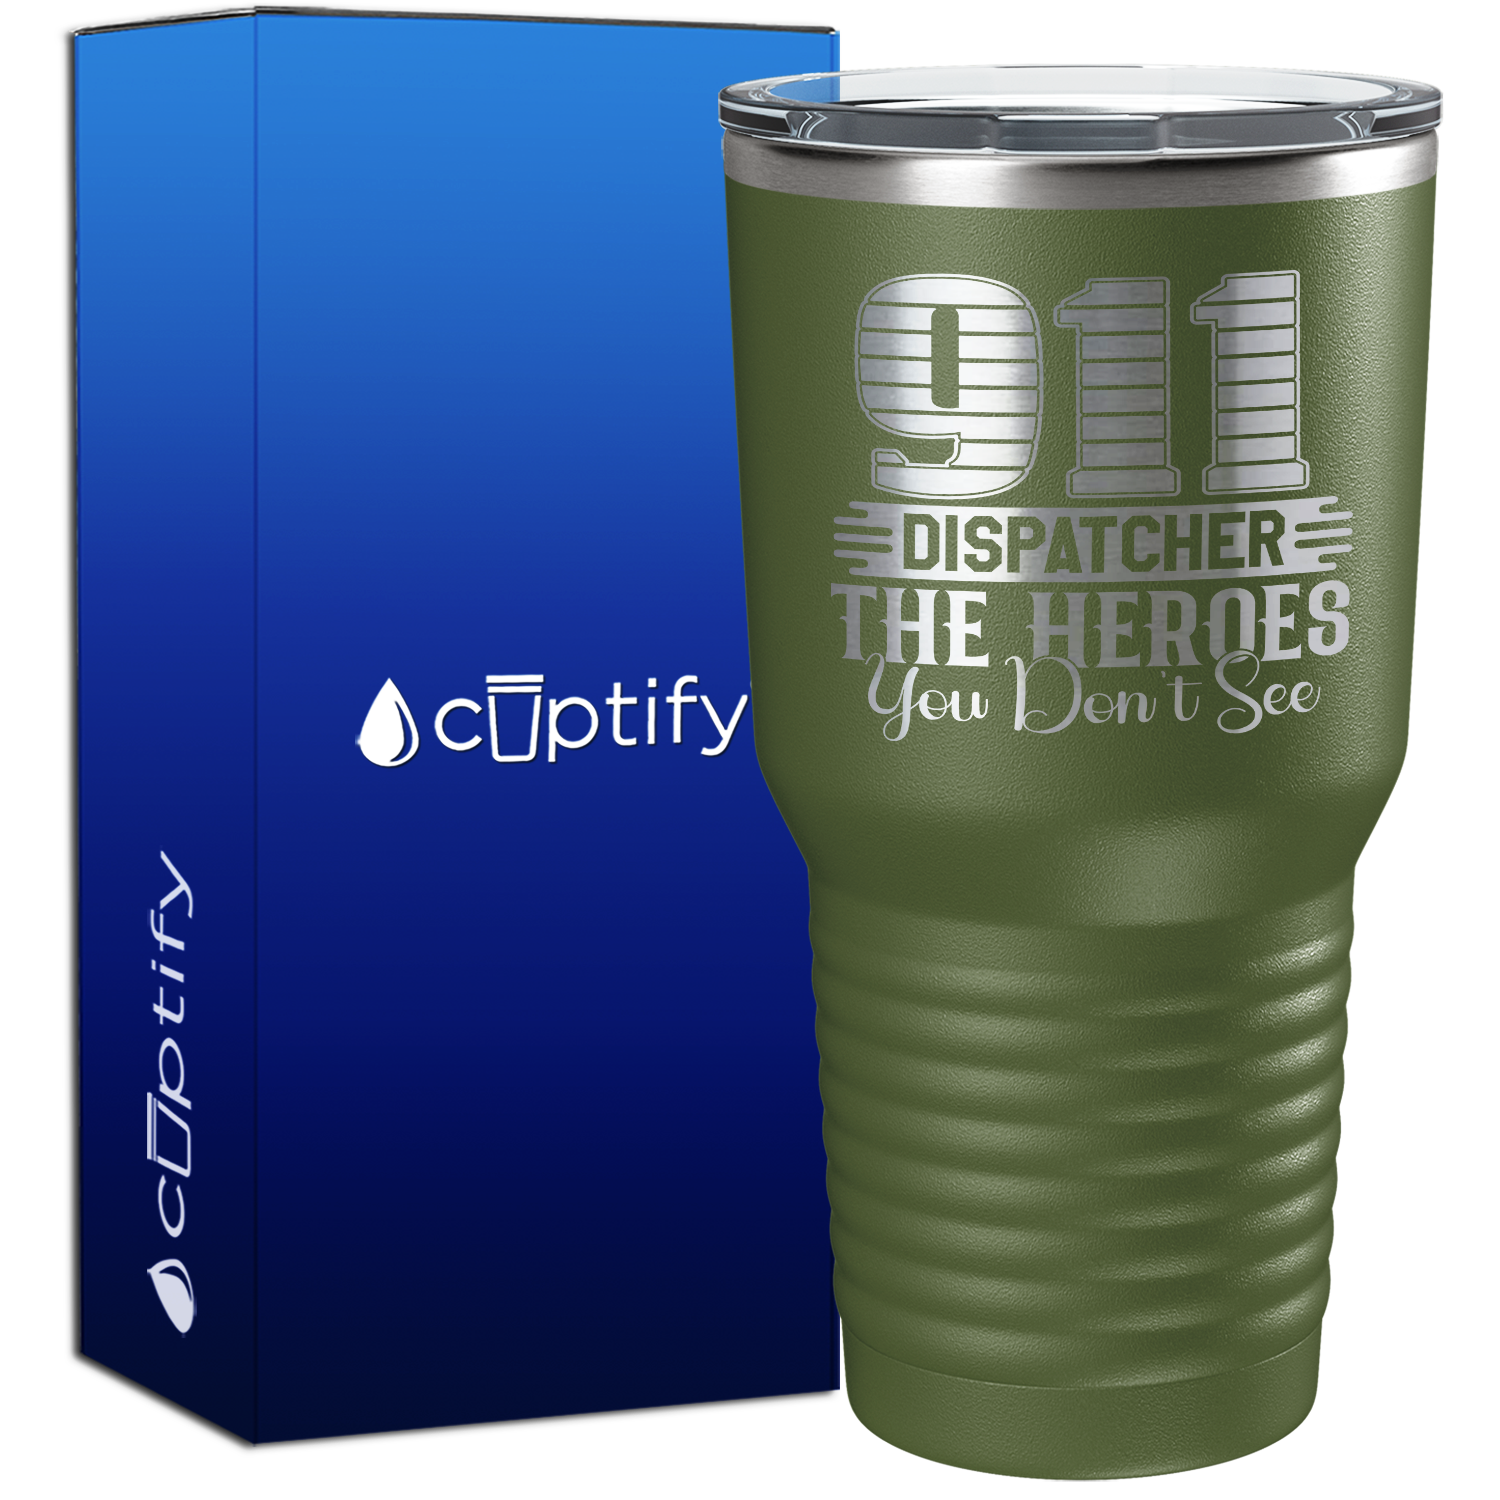 911 Dispatcher the Heroes You Don't See 30oz Dispatcher Tumbler